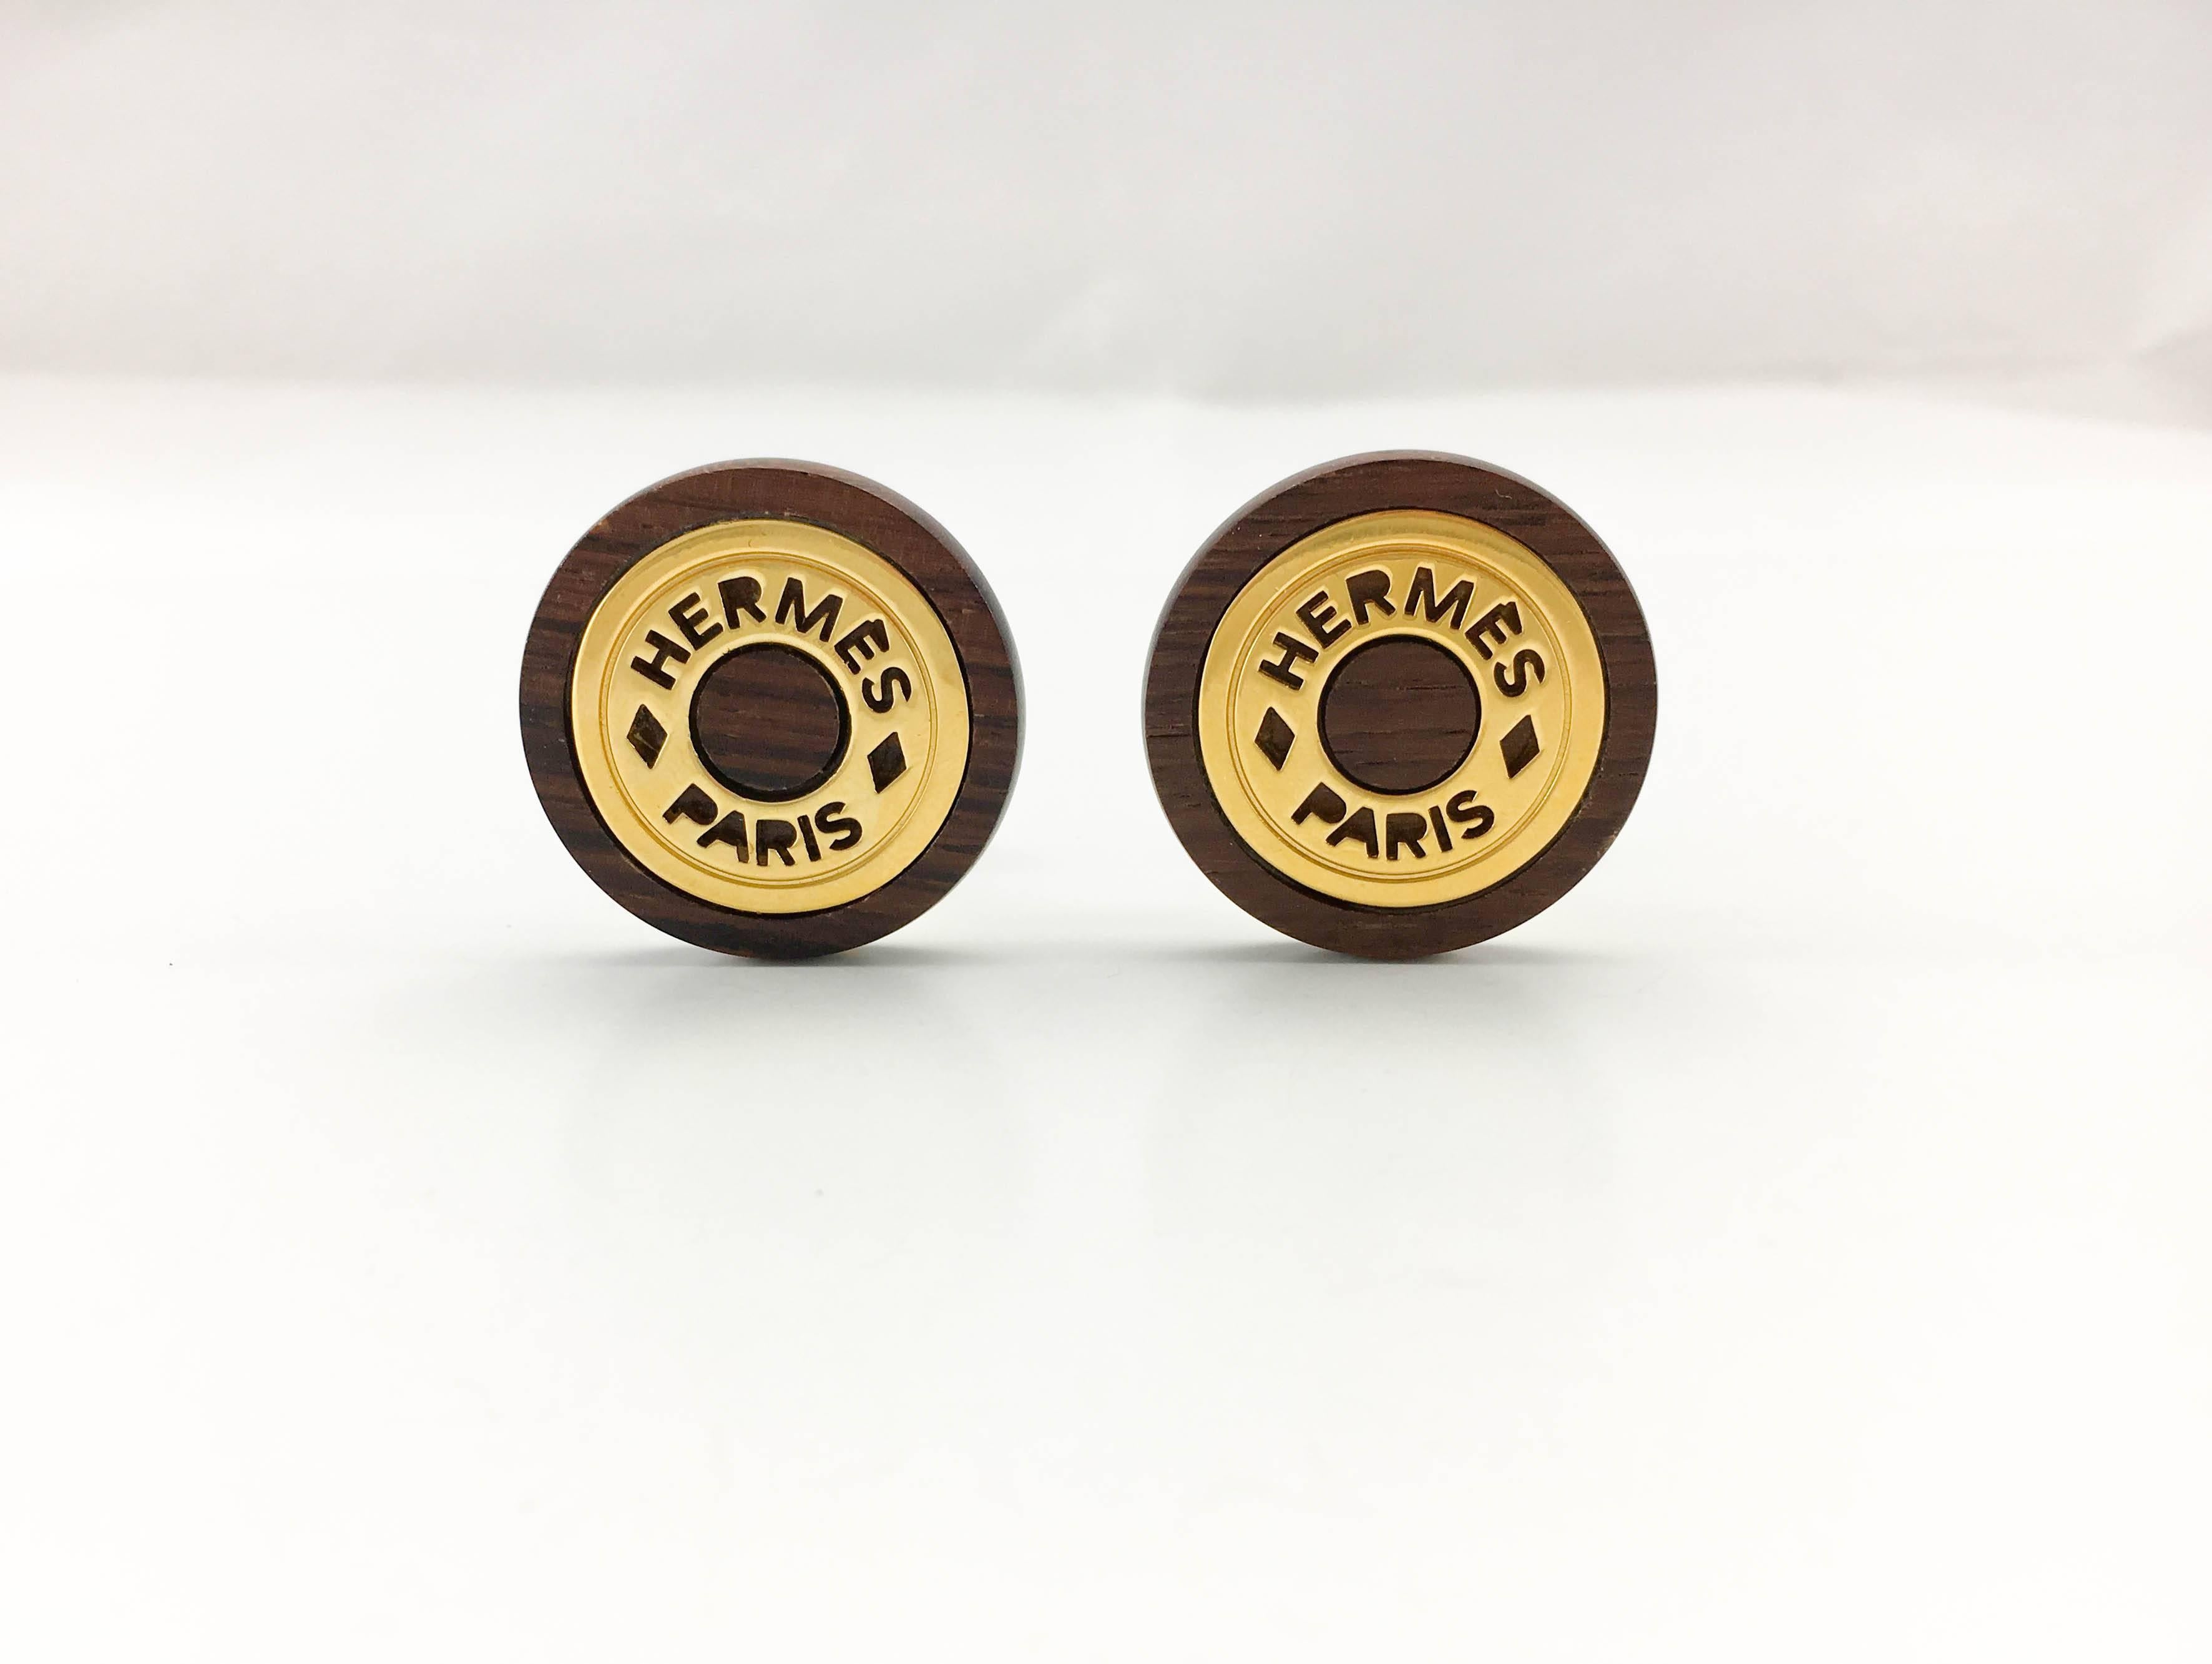 Vintage Hermes Wood and Gold-Plated Clip-On Earrings. Dating from the 1990’s these earrings by Hermes are a great way to add timeless style to a look. Made in wood and gold-plated base metal, they are round and read ‘Hermes Paris’. Hermes signed on